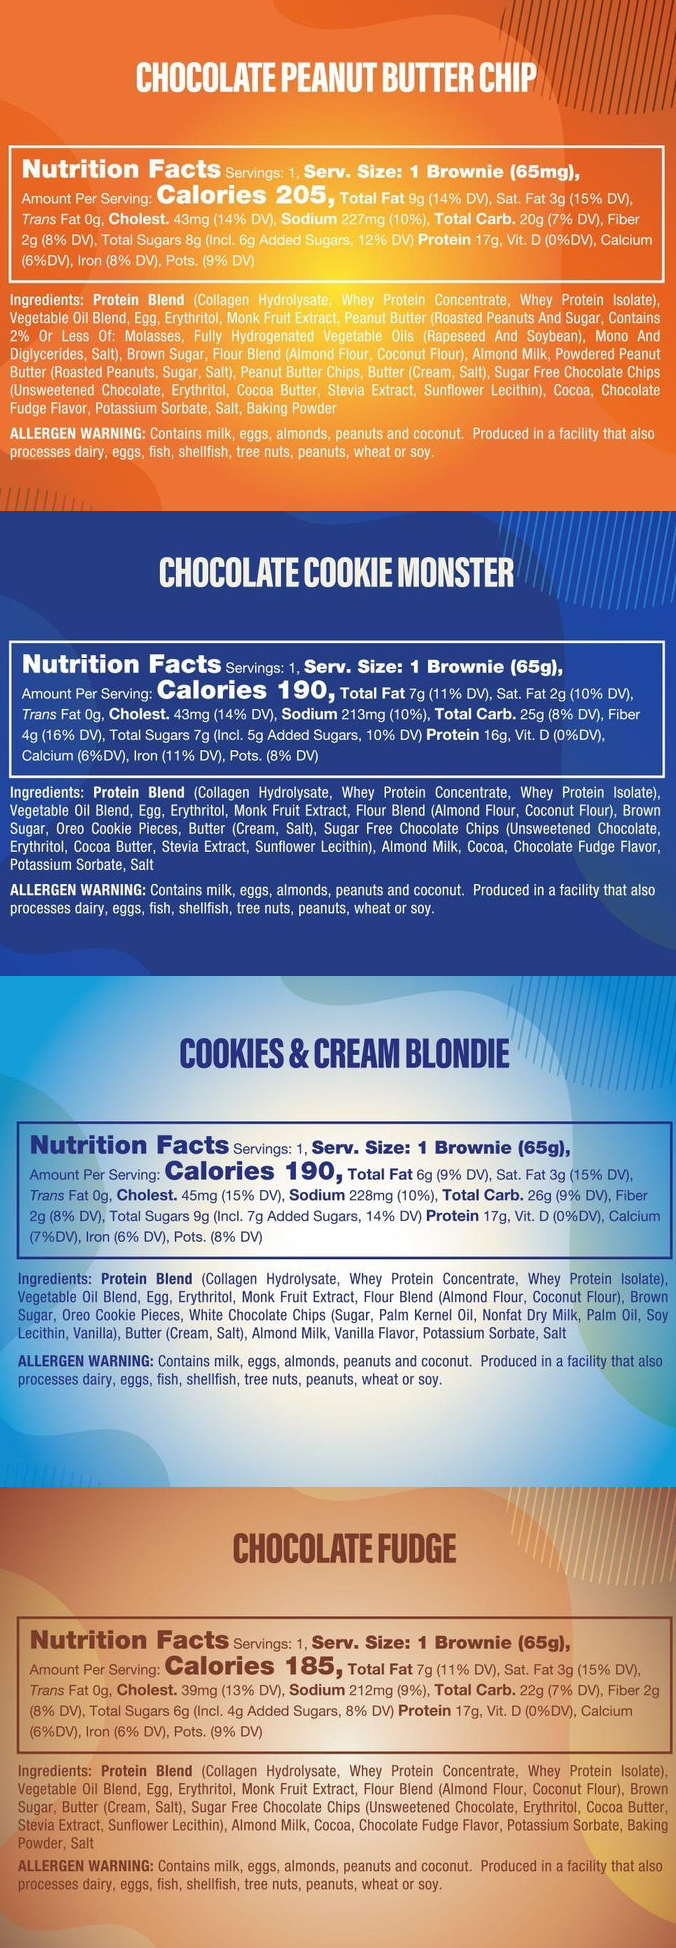 Nutrition information and ingredients for four brownies: Chocolate Peanut Butter Chip, Chocolate Cookie Monster, Cookies & Cream Blondie, Chocolate Fudge. Allergen warnings included.